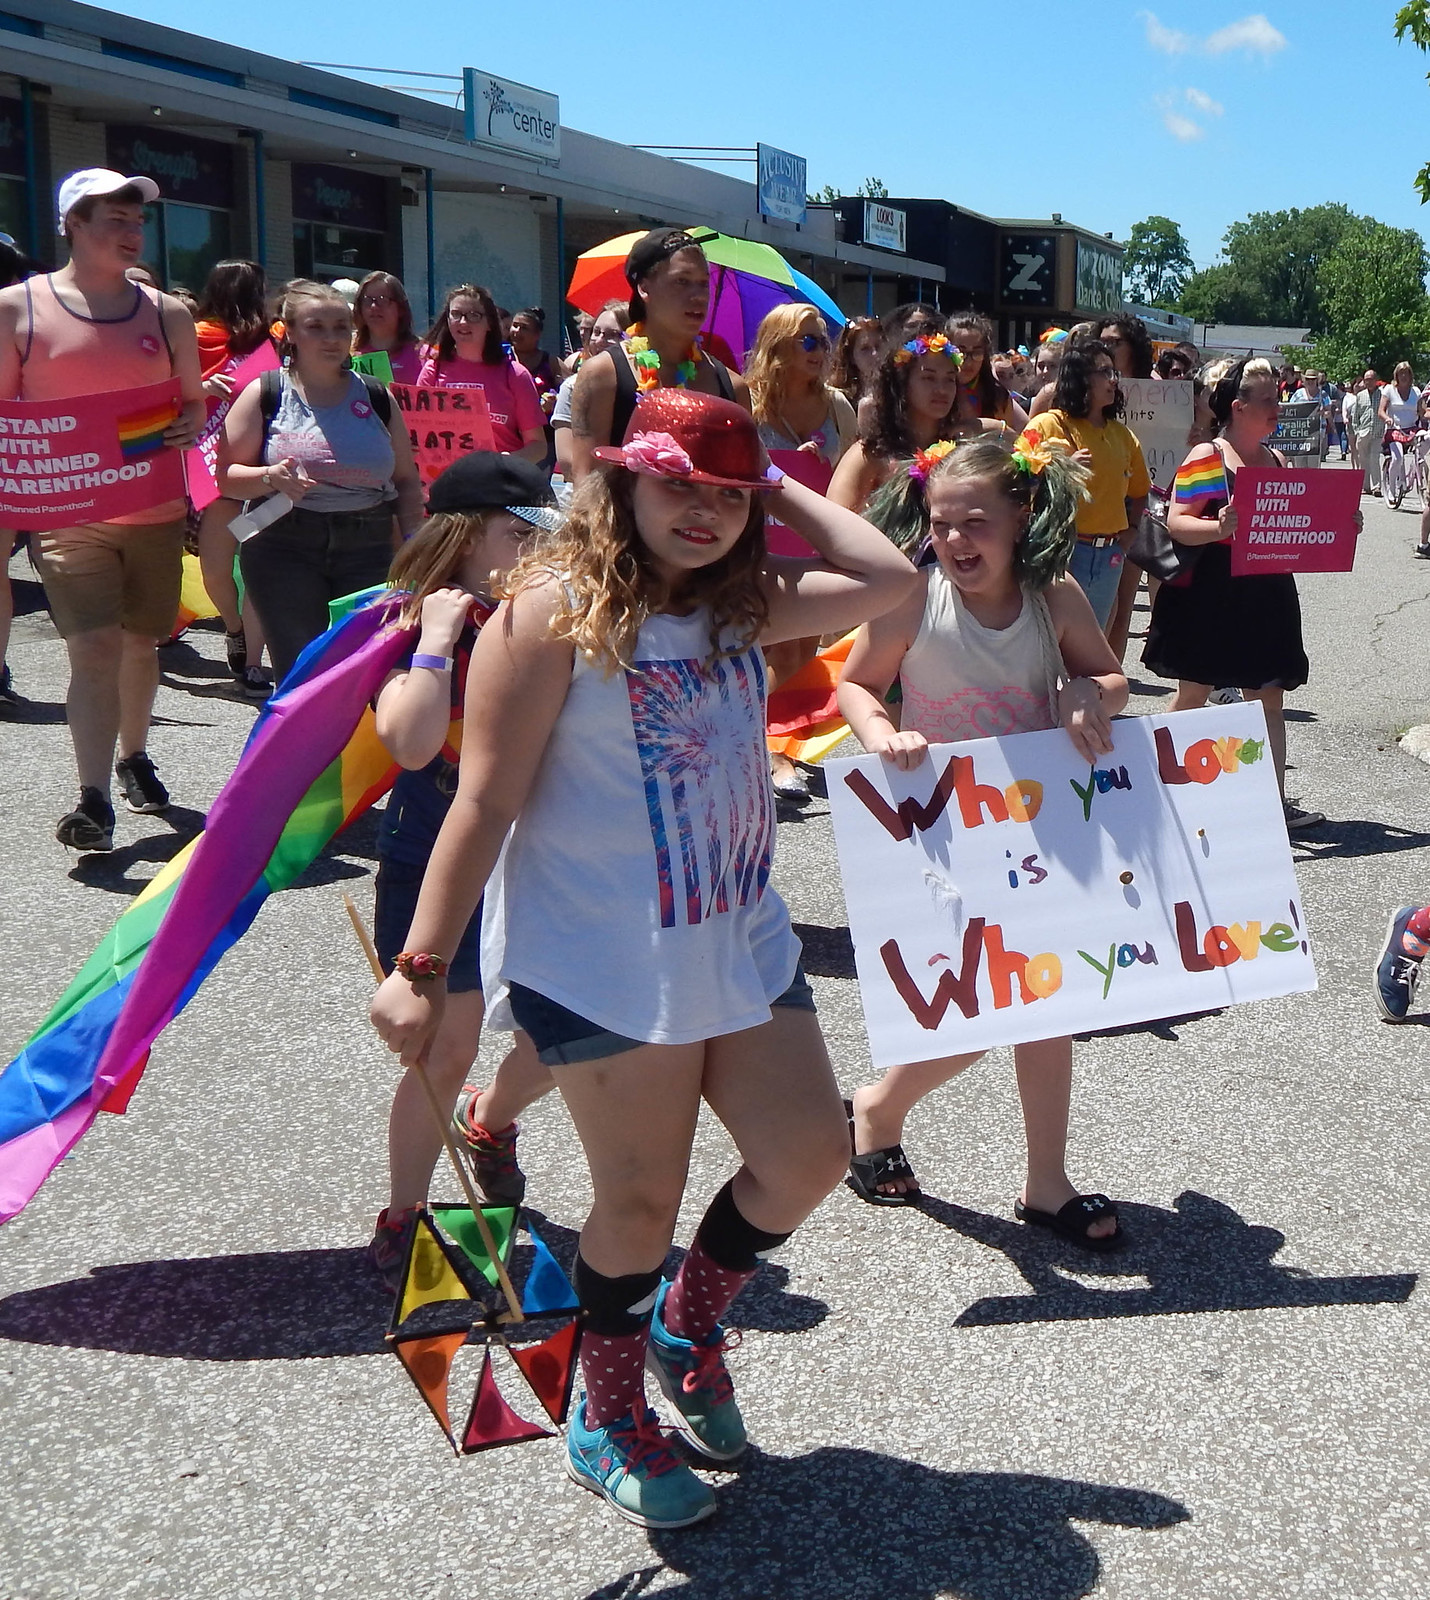 Stepping off in Pride Parade, with Planned Parenthood